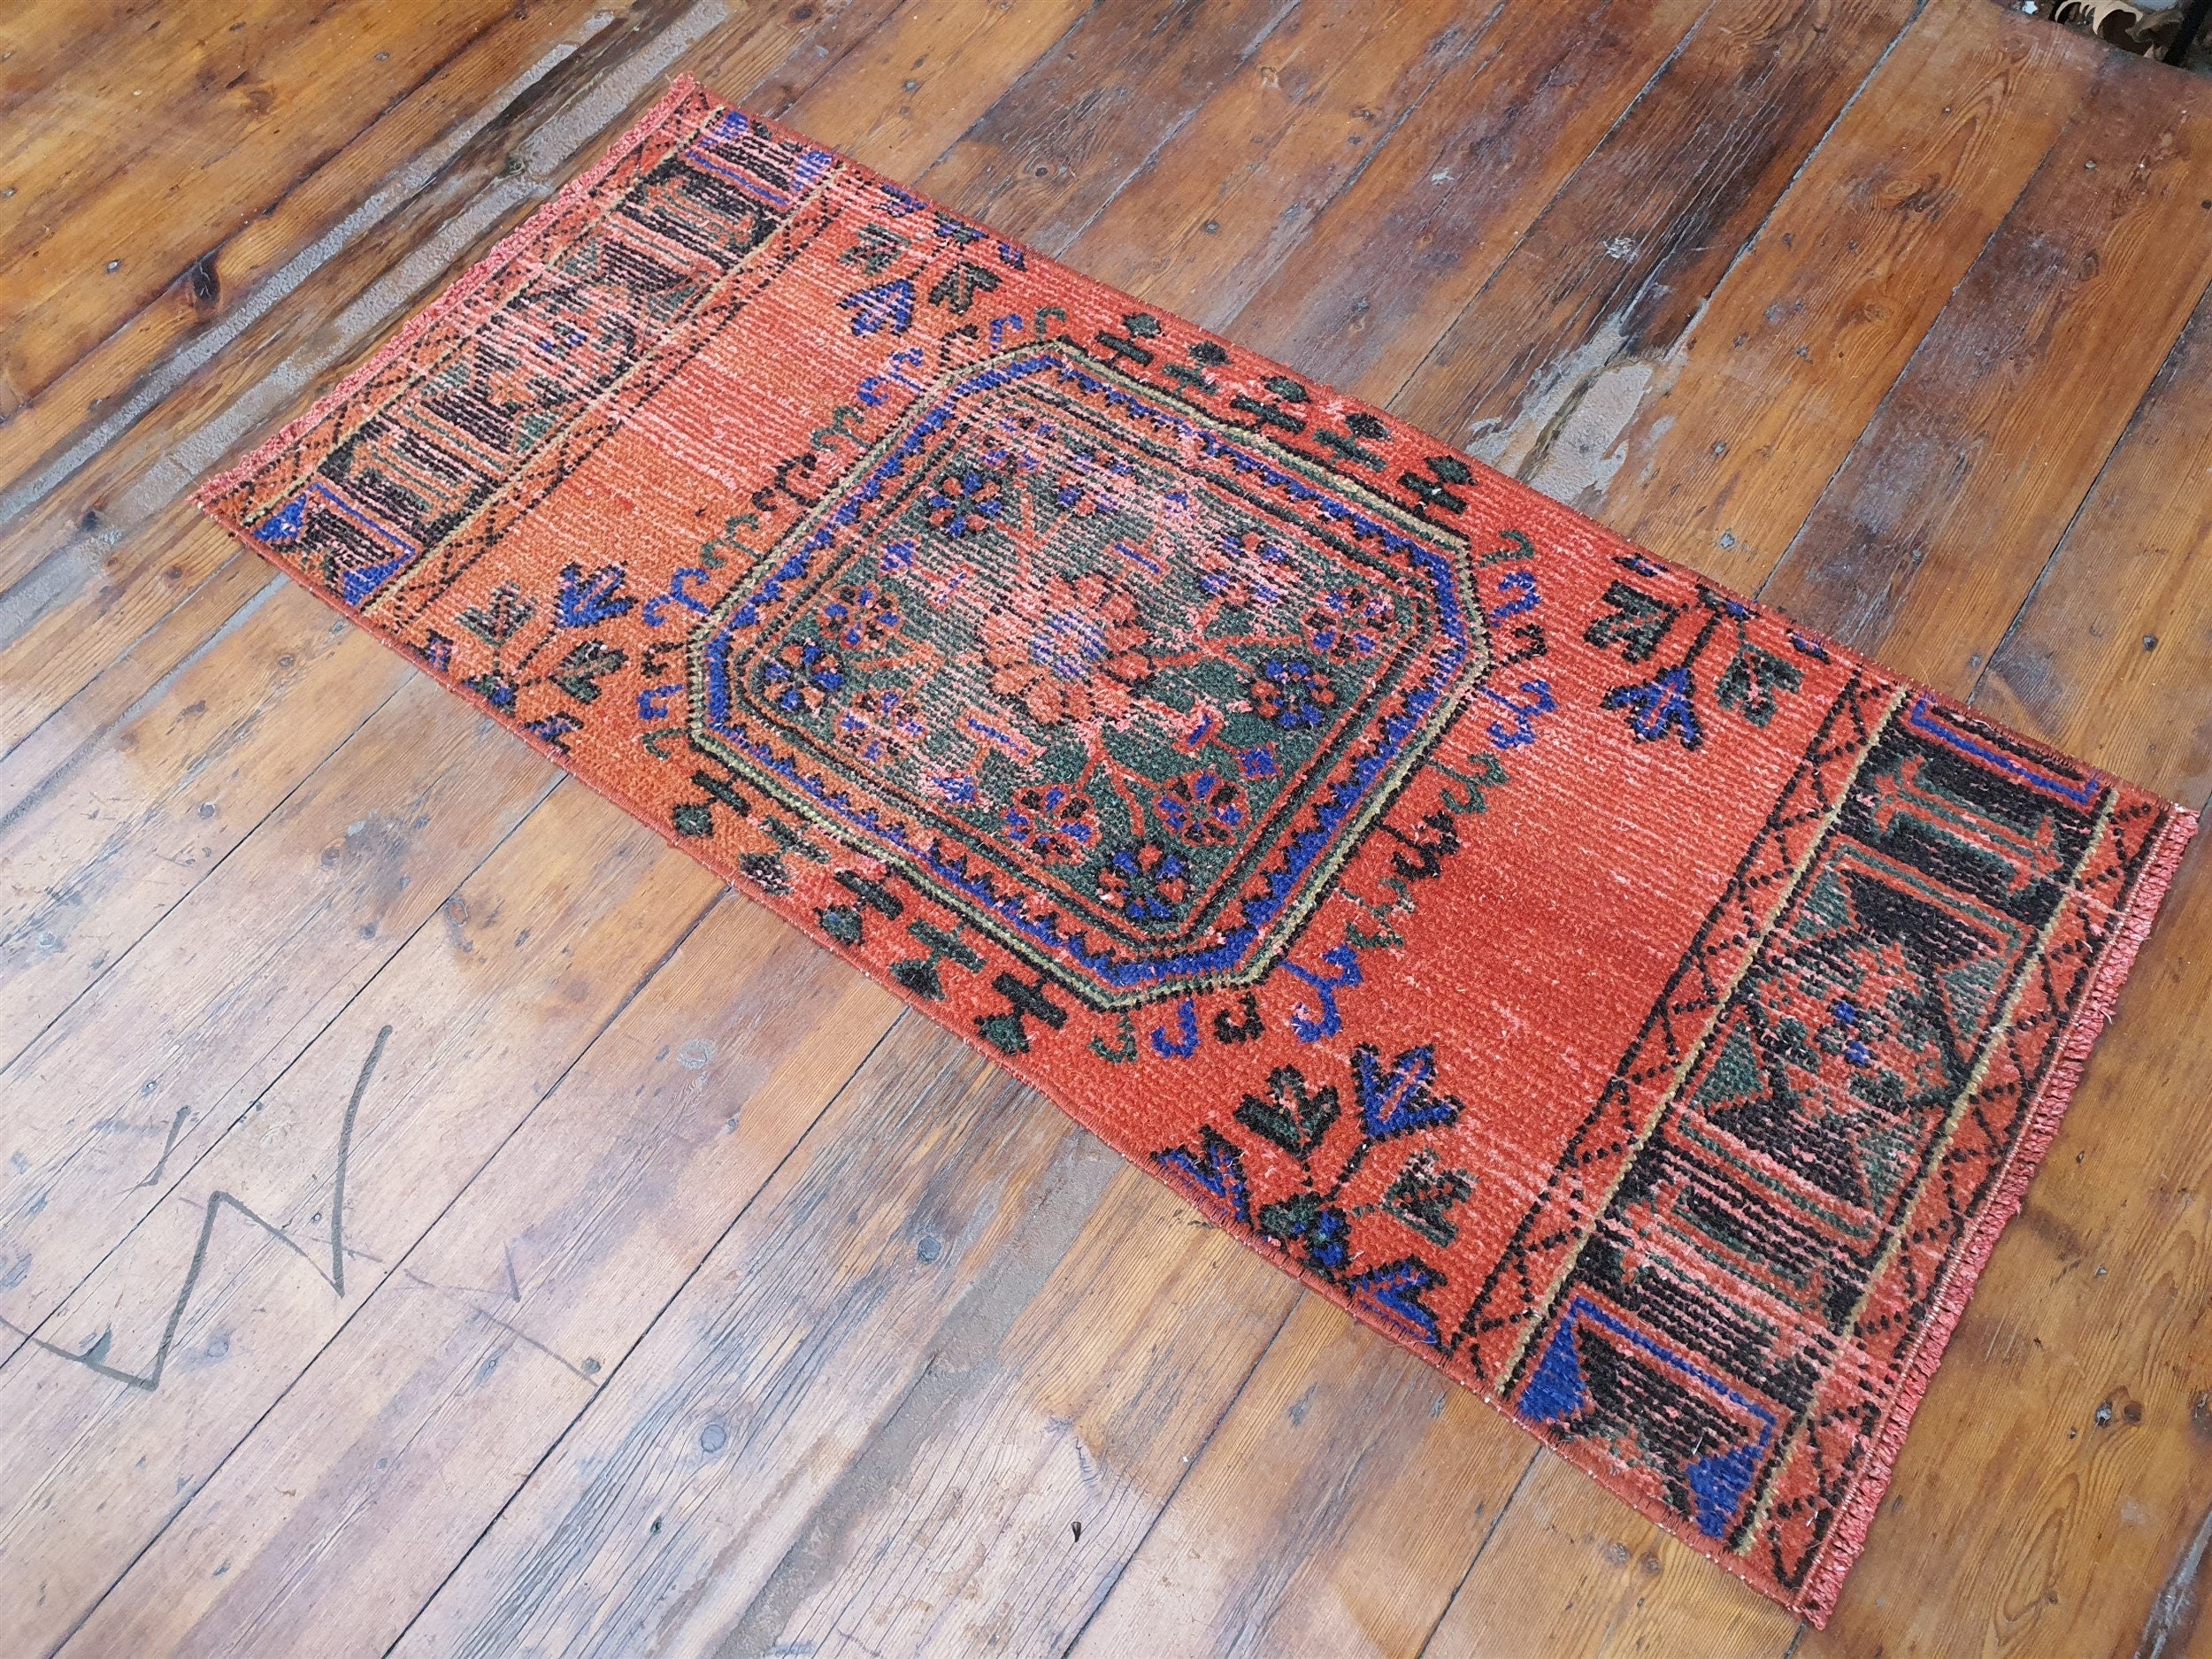 Small Turkish Rug, 4 ft x 1 ft 7 in, Apricot Orange and Teal Green / Grey Vintage Faded Distressed Door Mat